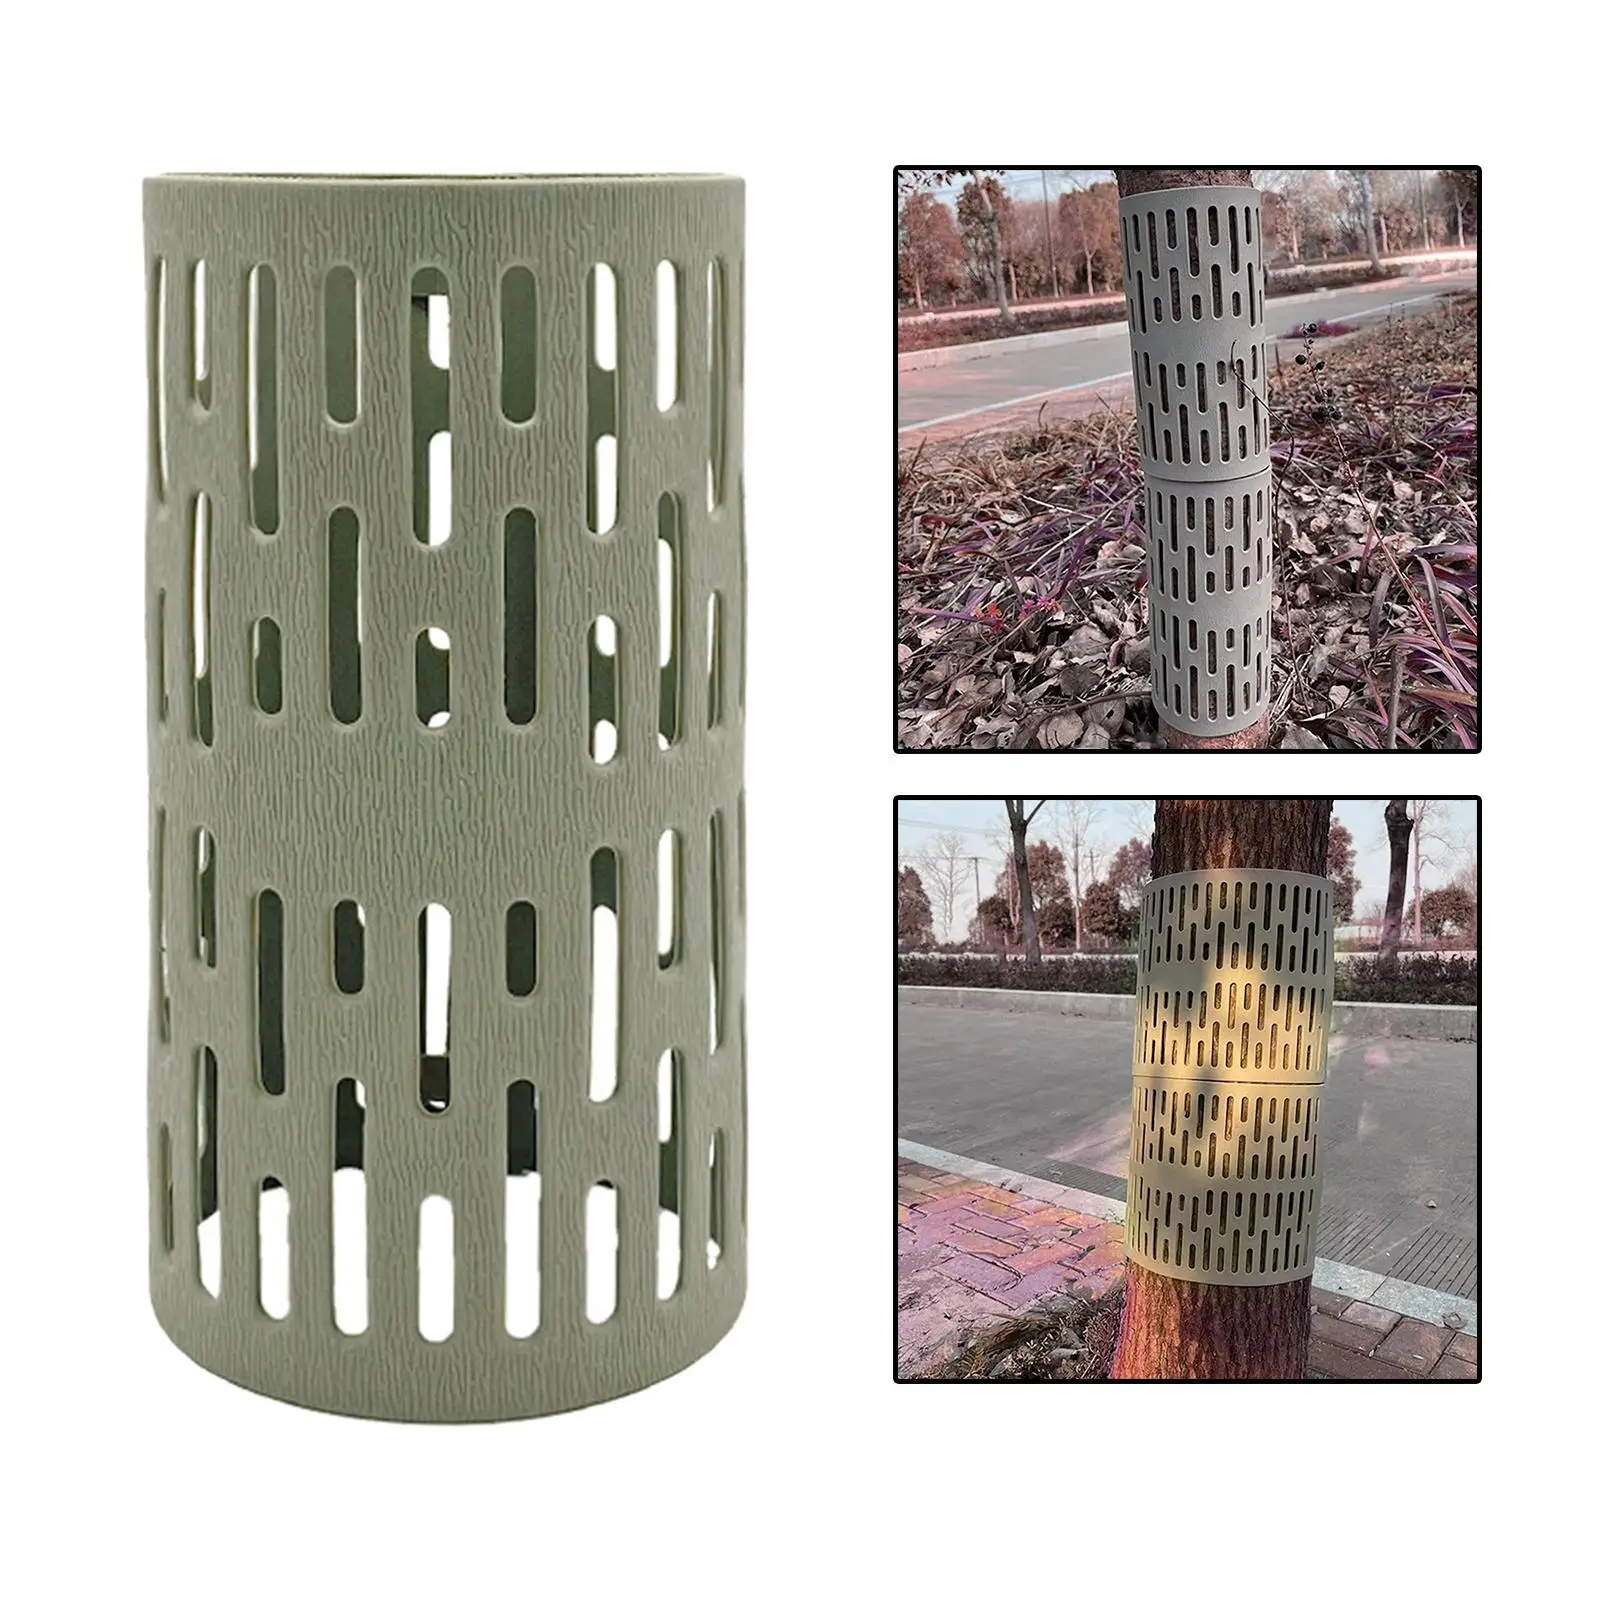 Tree Trunk Protector Easy Locking Weatherproof Tree Guard for Preventing Trimmers Protecting Bark & Saplings from Sun Damage